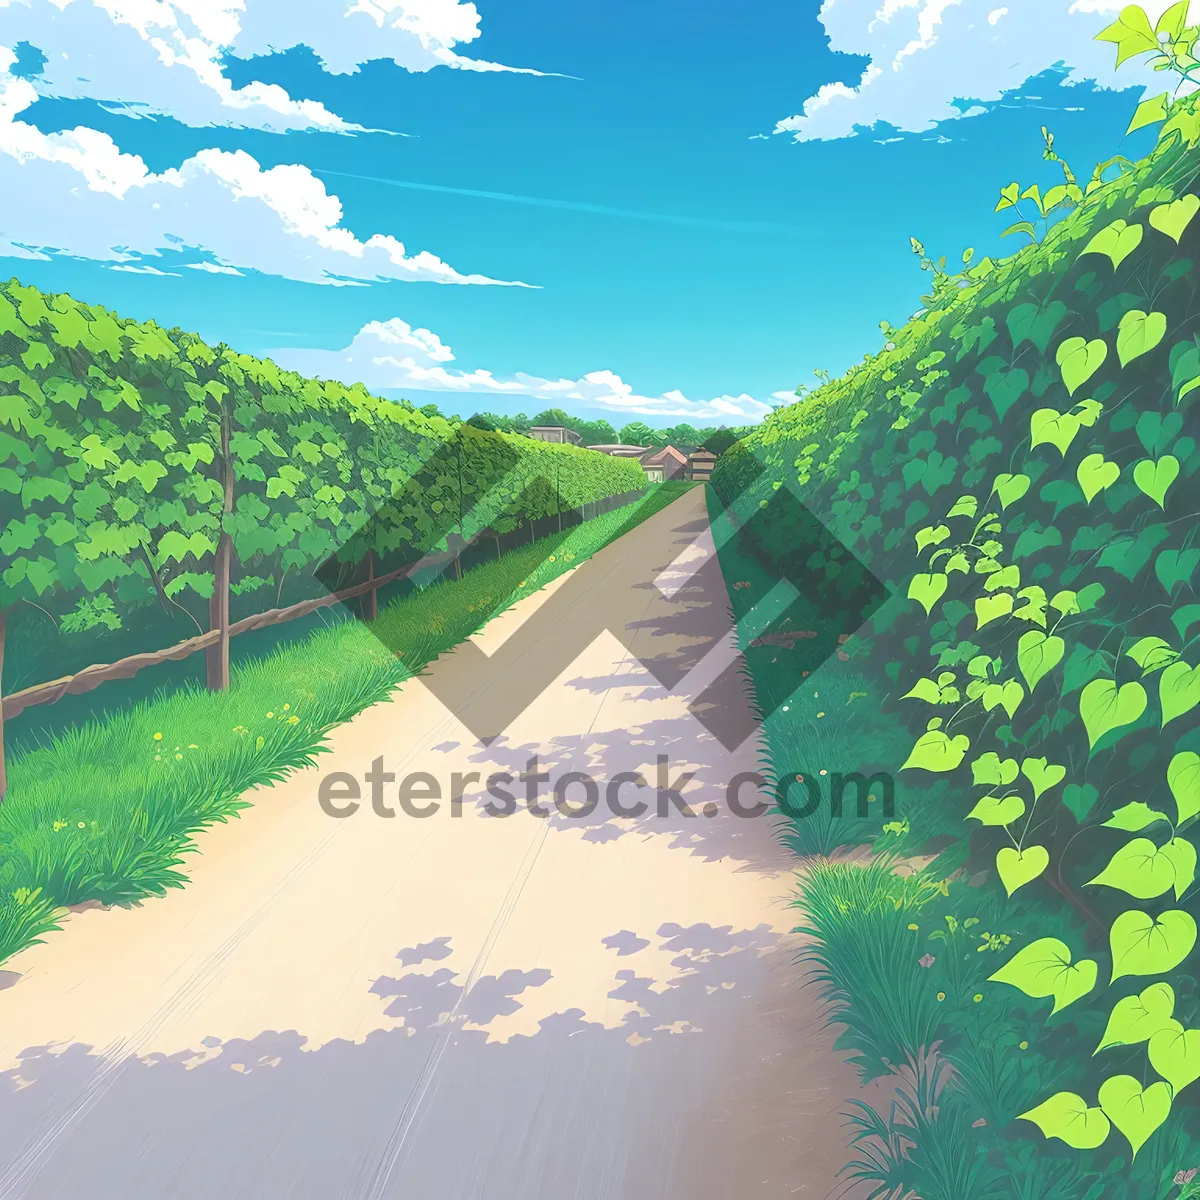 Picture of Idyllic Vineyard Landscape With Rolling Hills